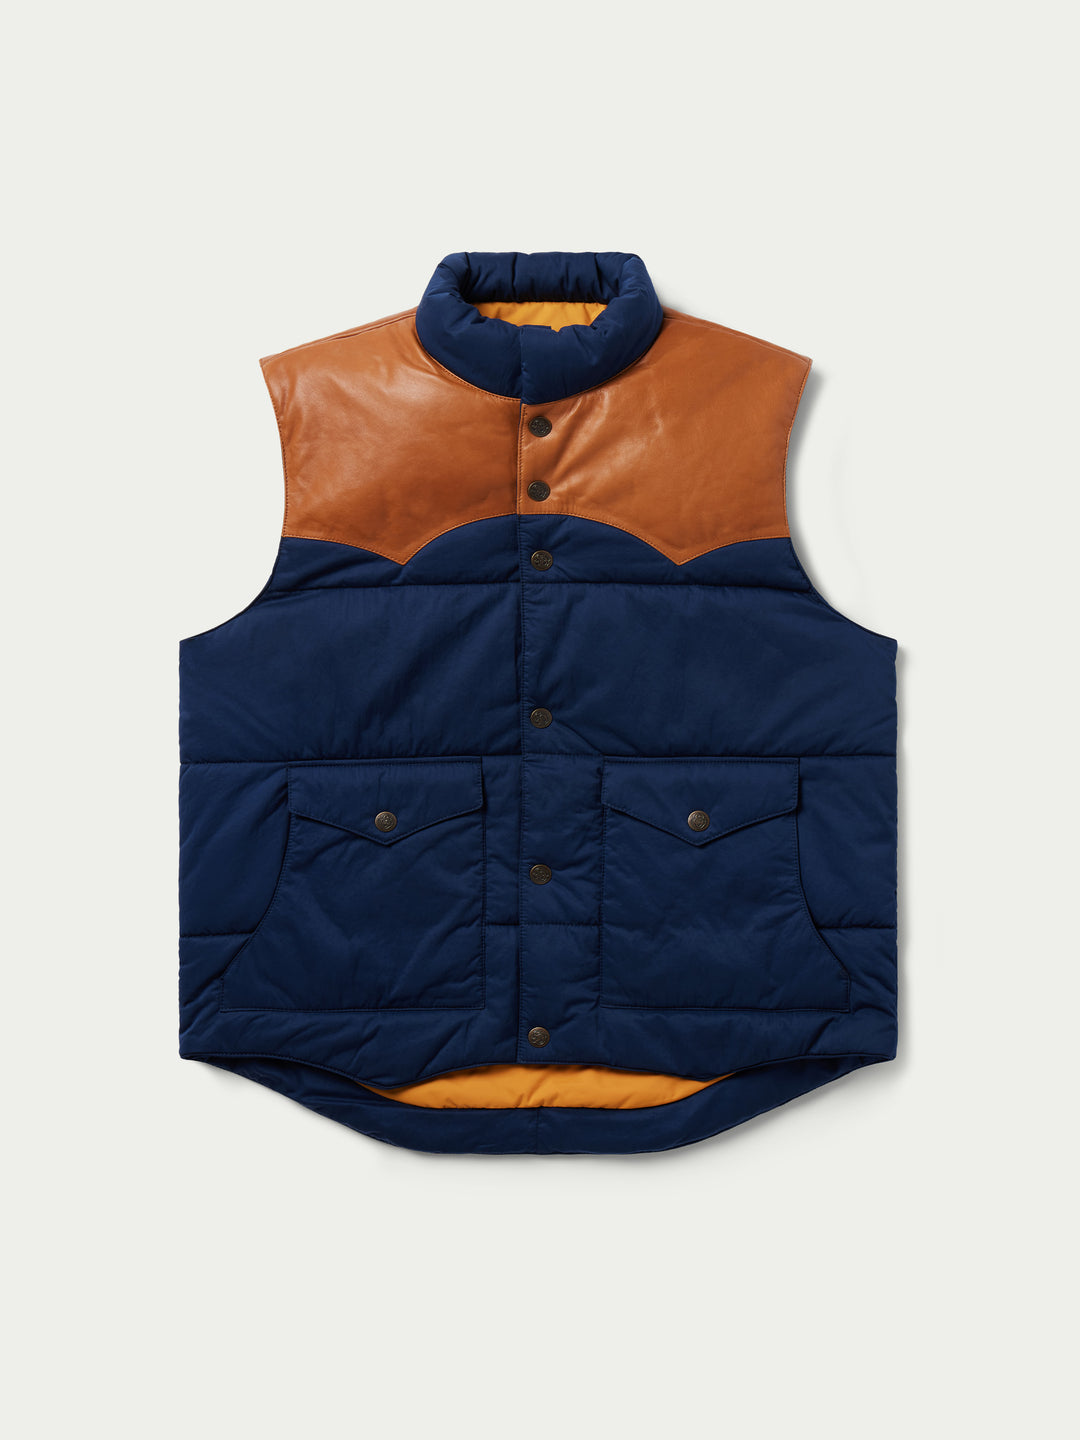 WYOMING VEST - Schaefer Outfitter